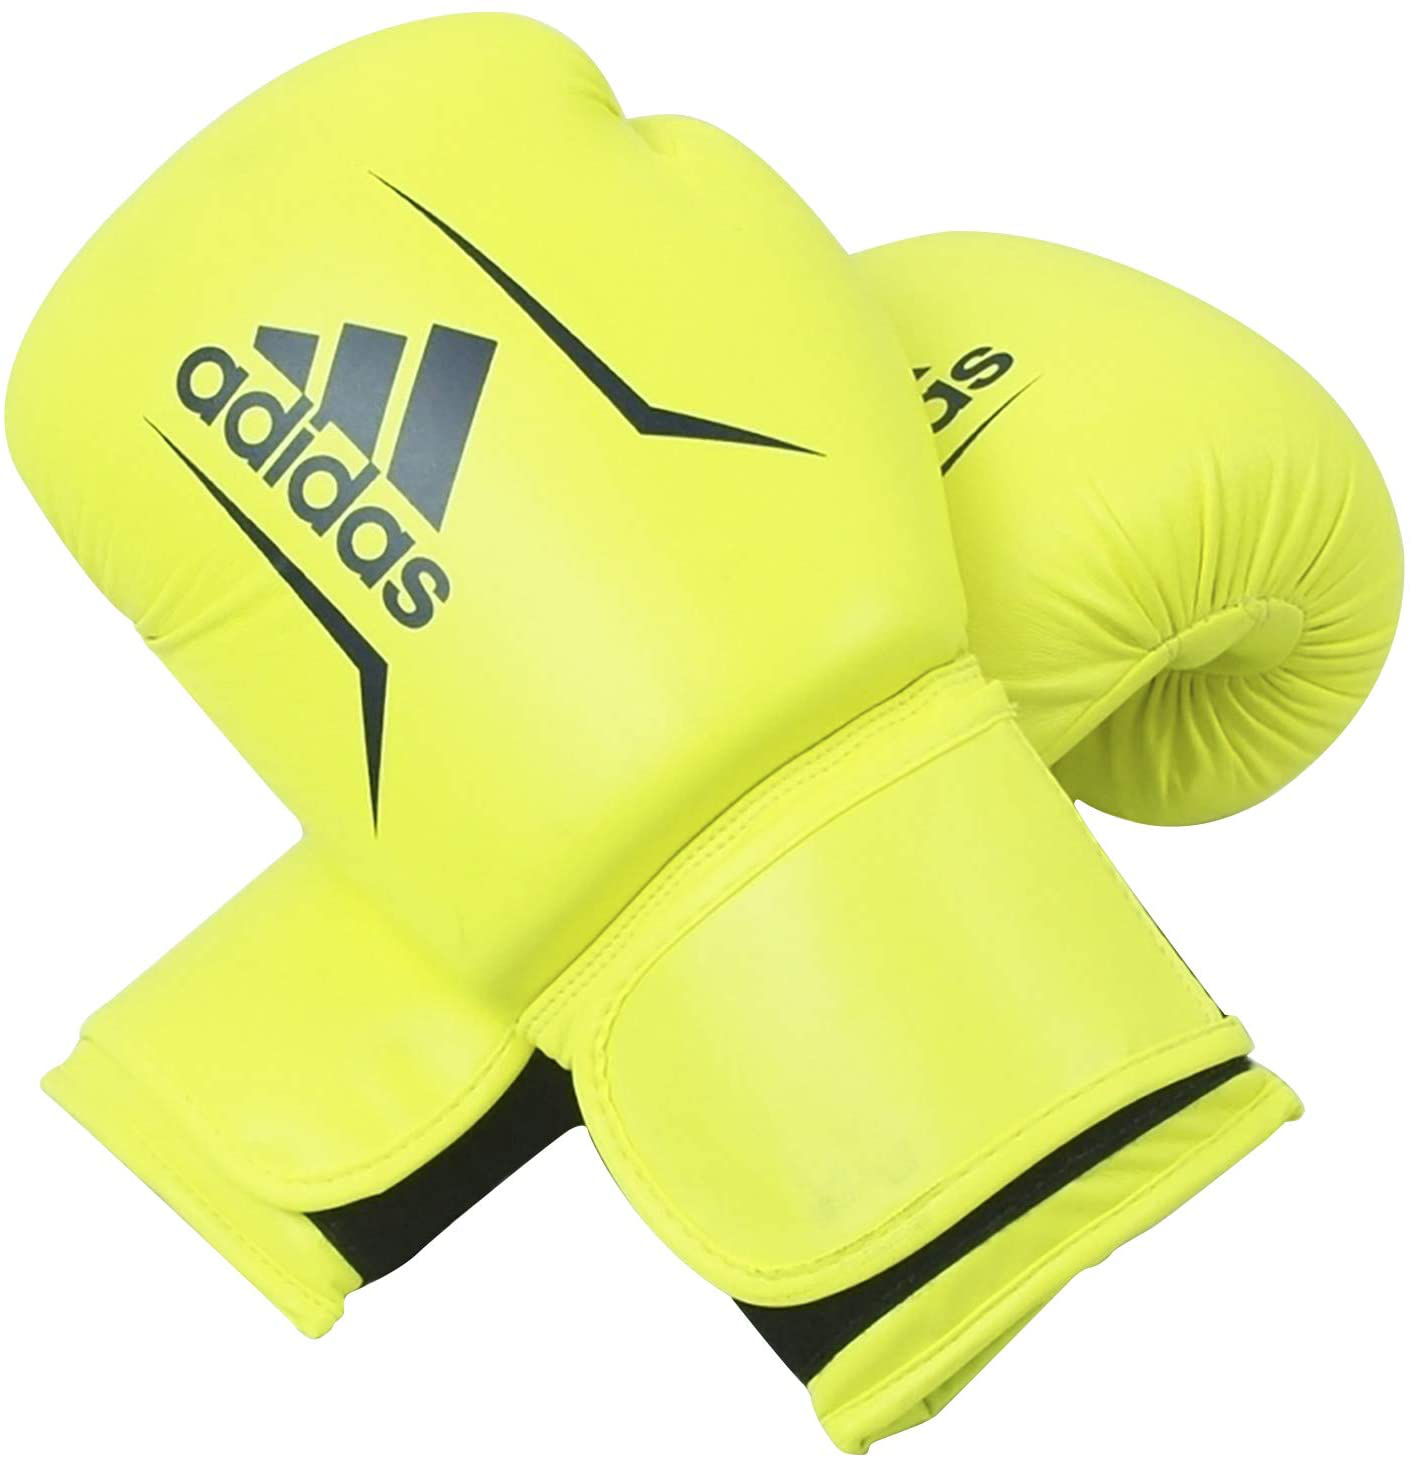 — 3.0 FLX for 50 & Men/Wome Boxing Adidas FightersShop Speed Gloves Kickboxing Boxing